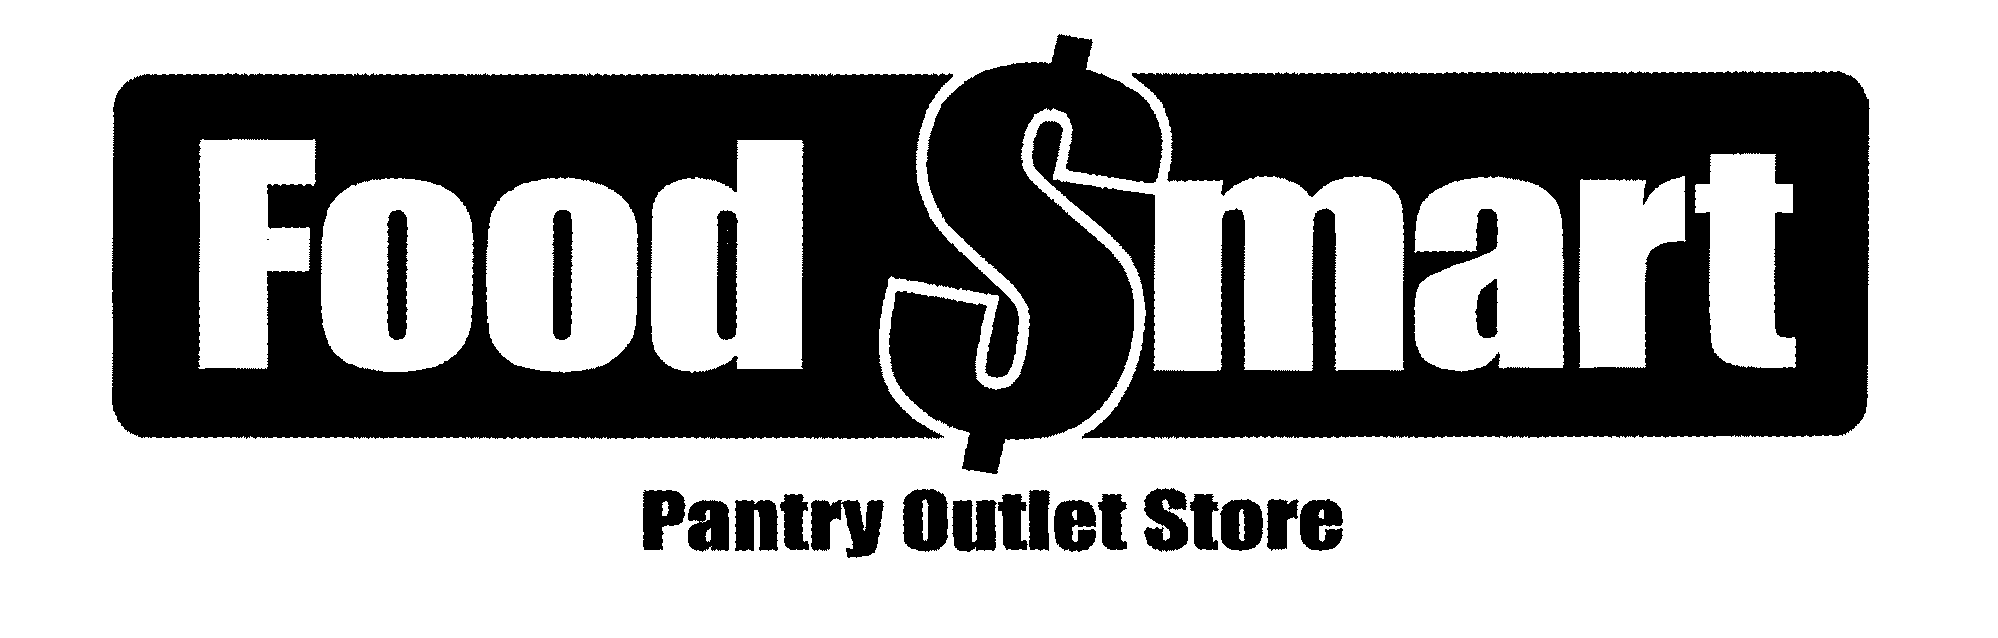 Trademark Logo FOOD $MART PANTRY OUTLET STORE